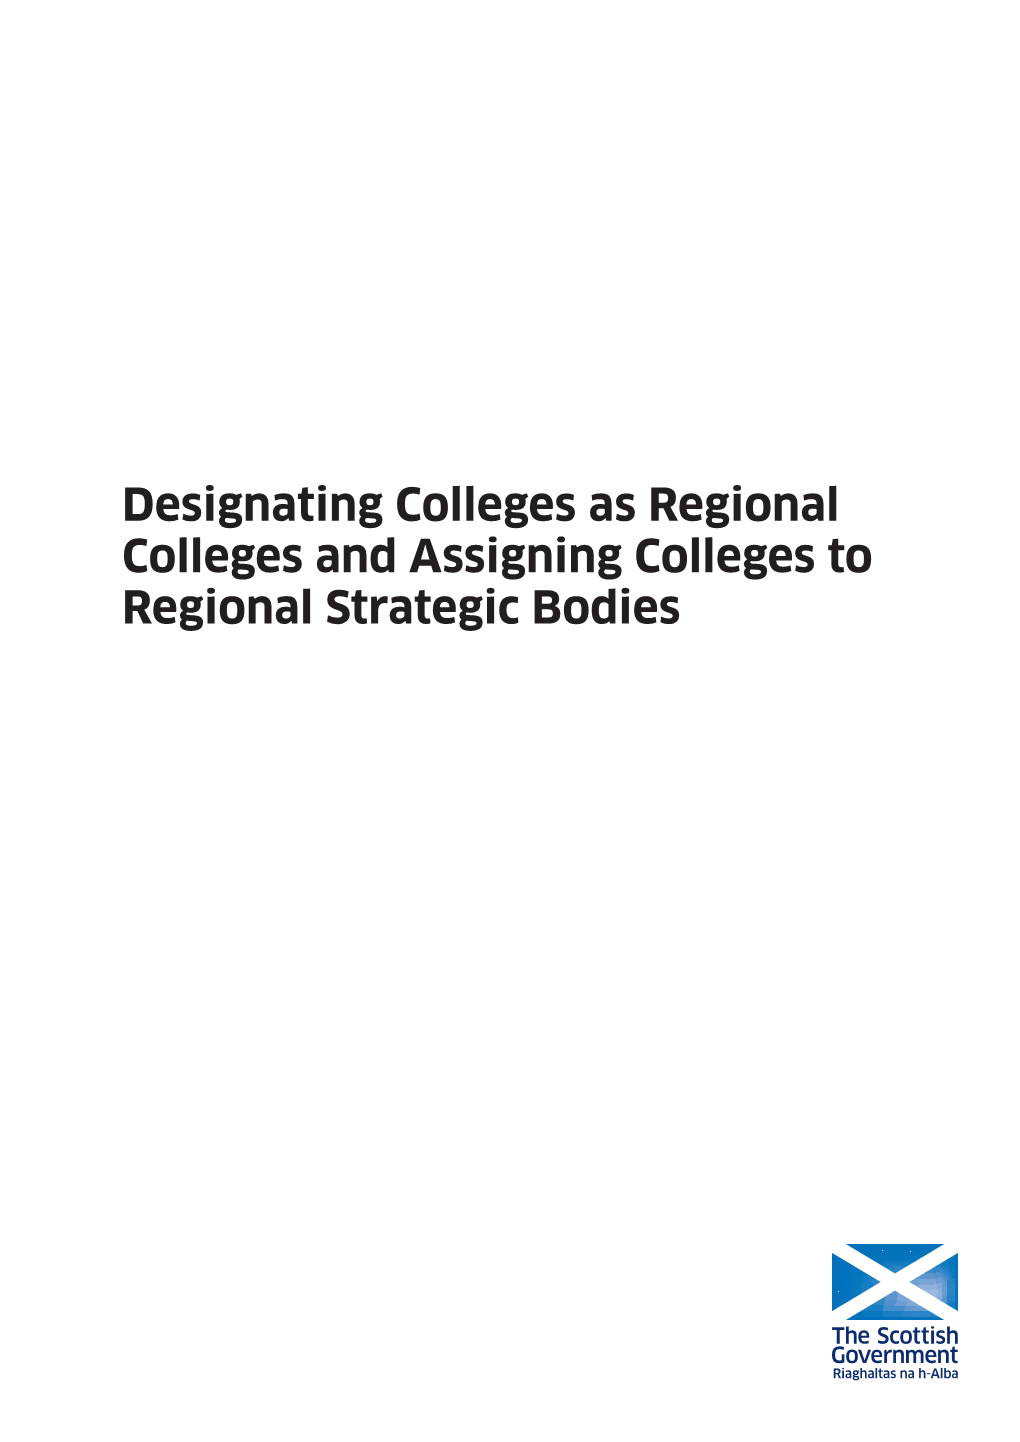 Designating Colleges As Regional Colleges and Assigning Colleges To